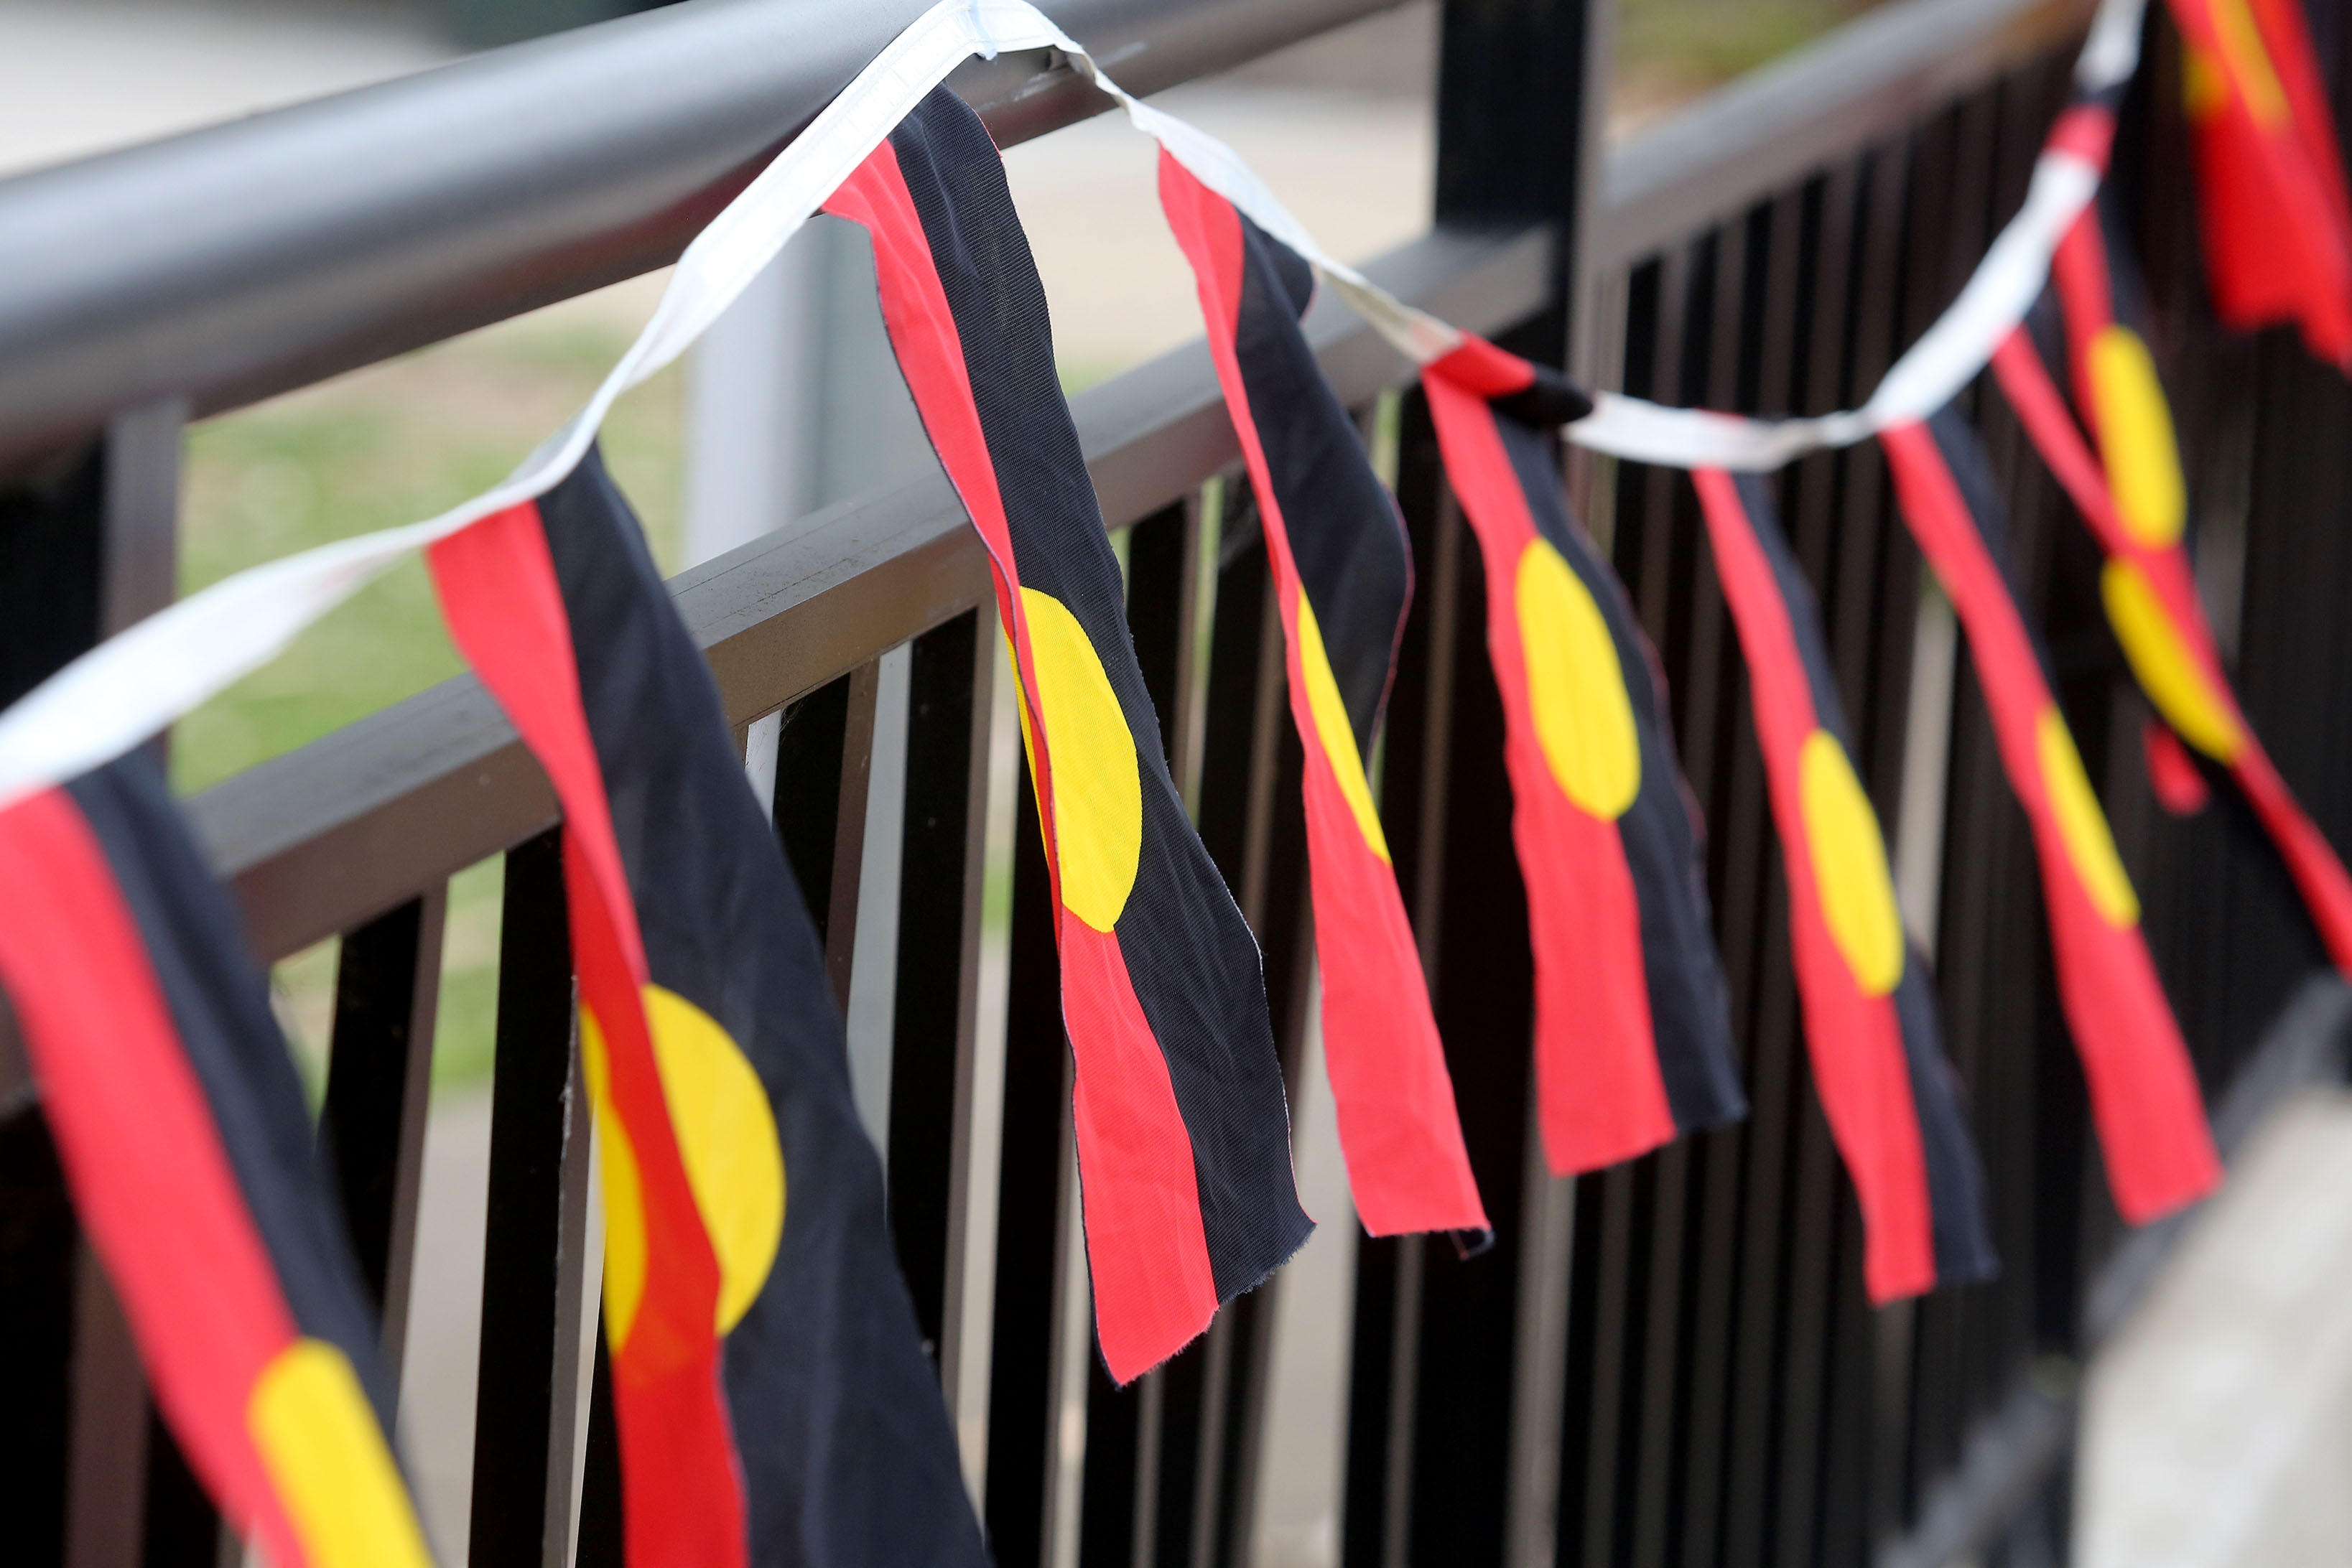 National Reconciliation Week